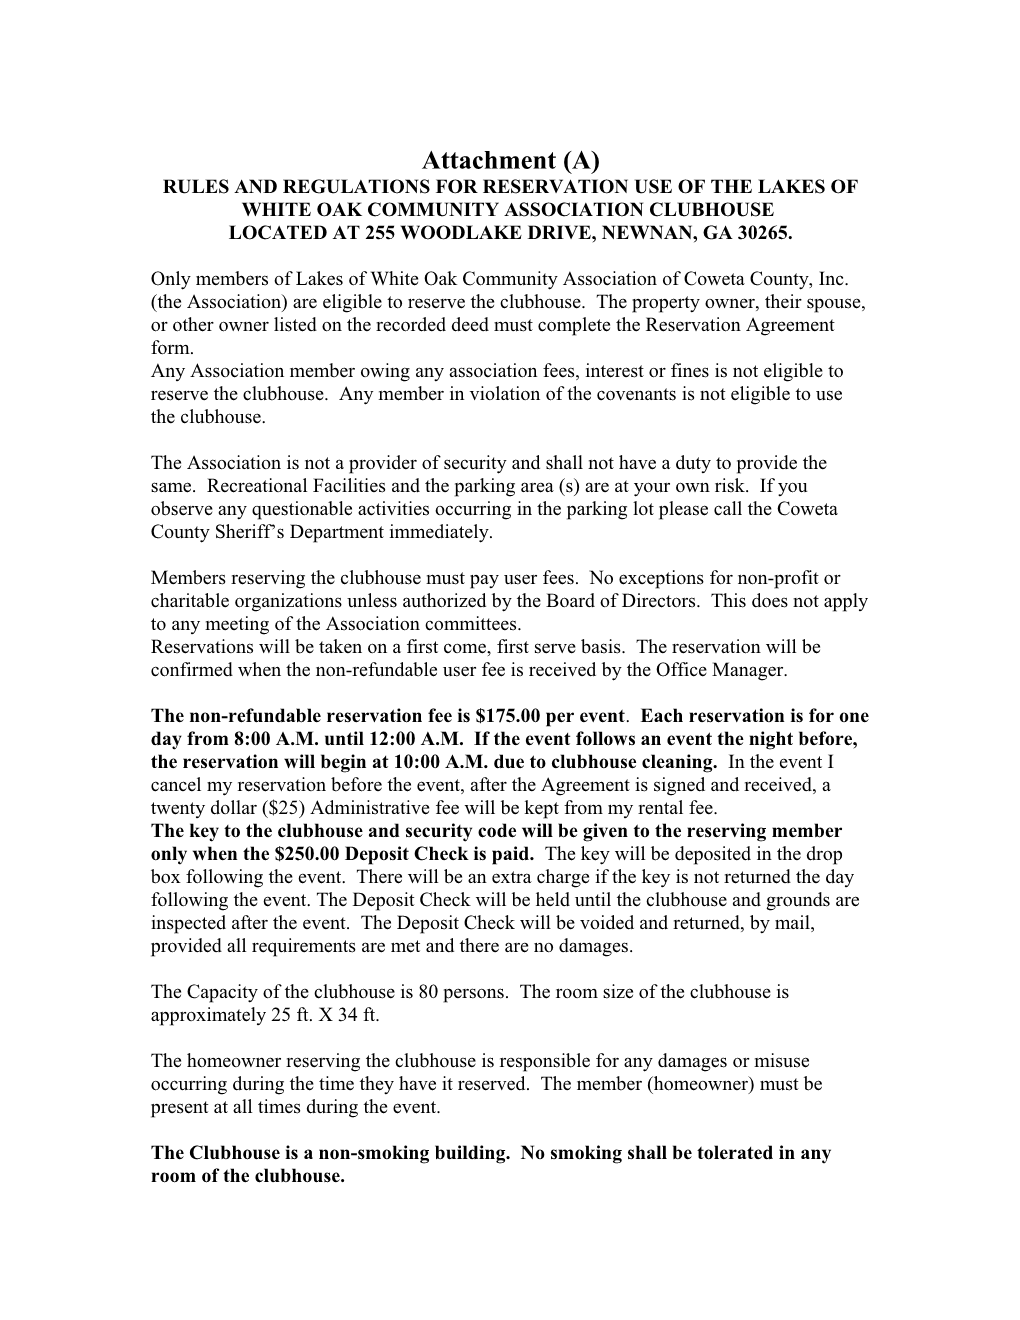 Rules and Regulations for Reservation Use of the Lakes of White Oak Community Association